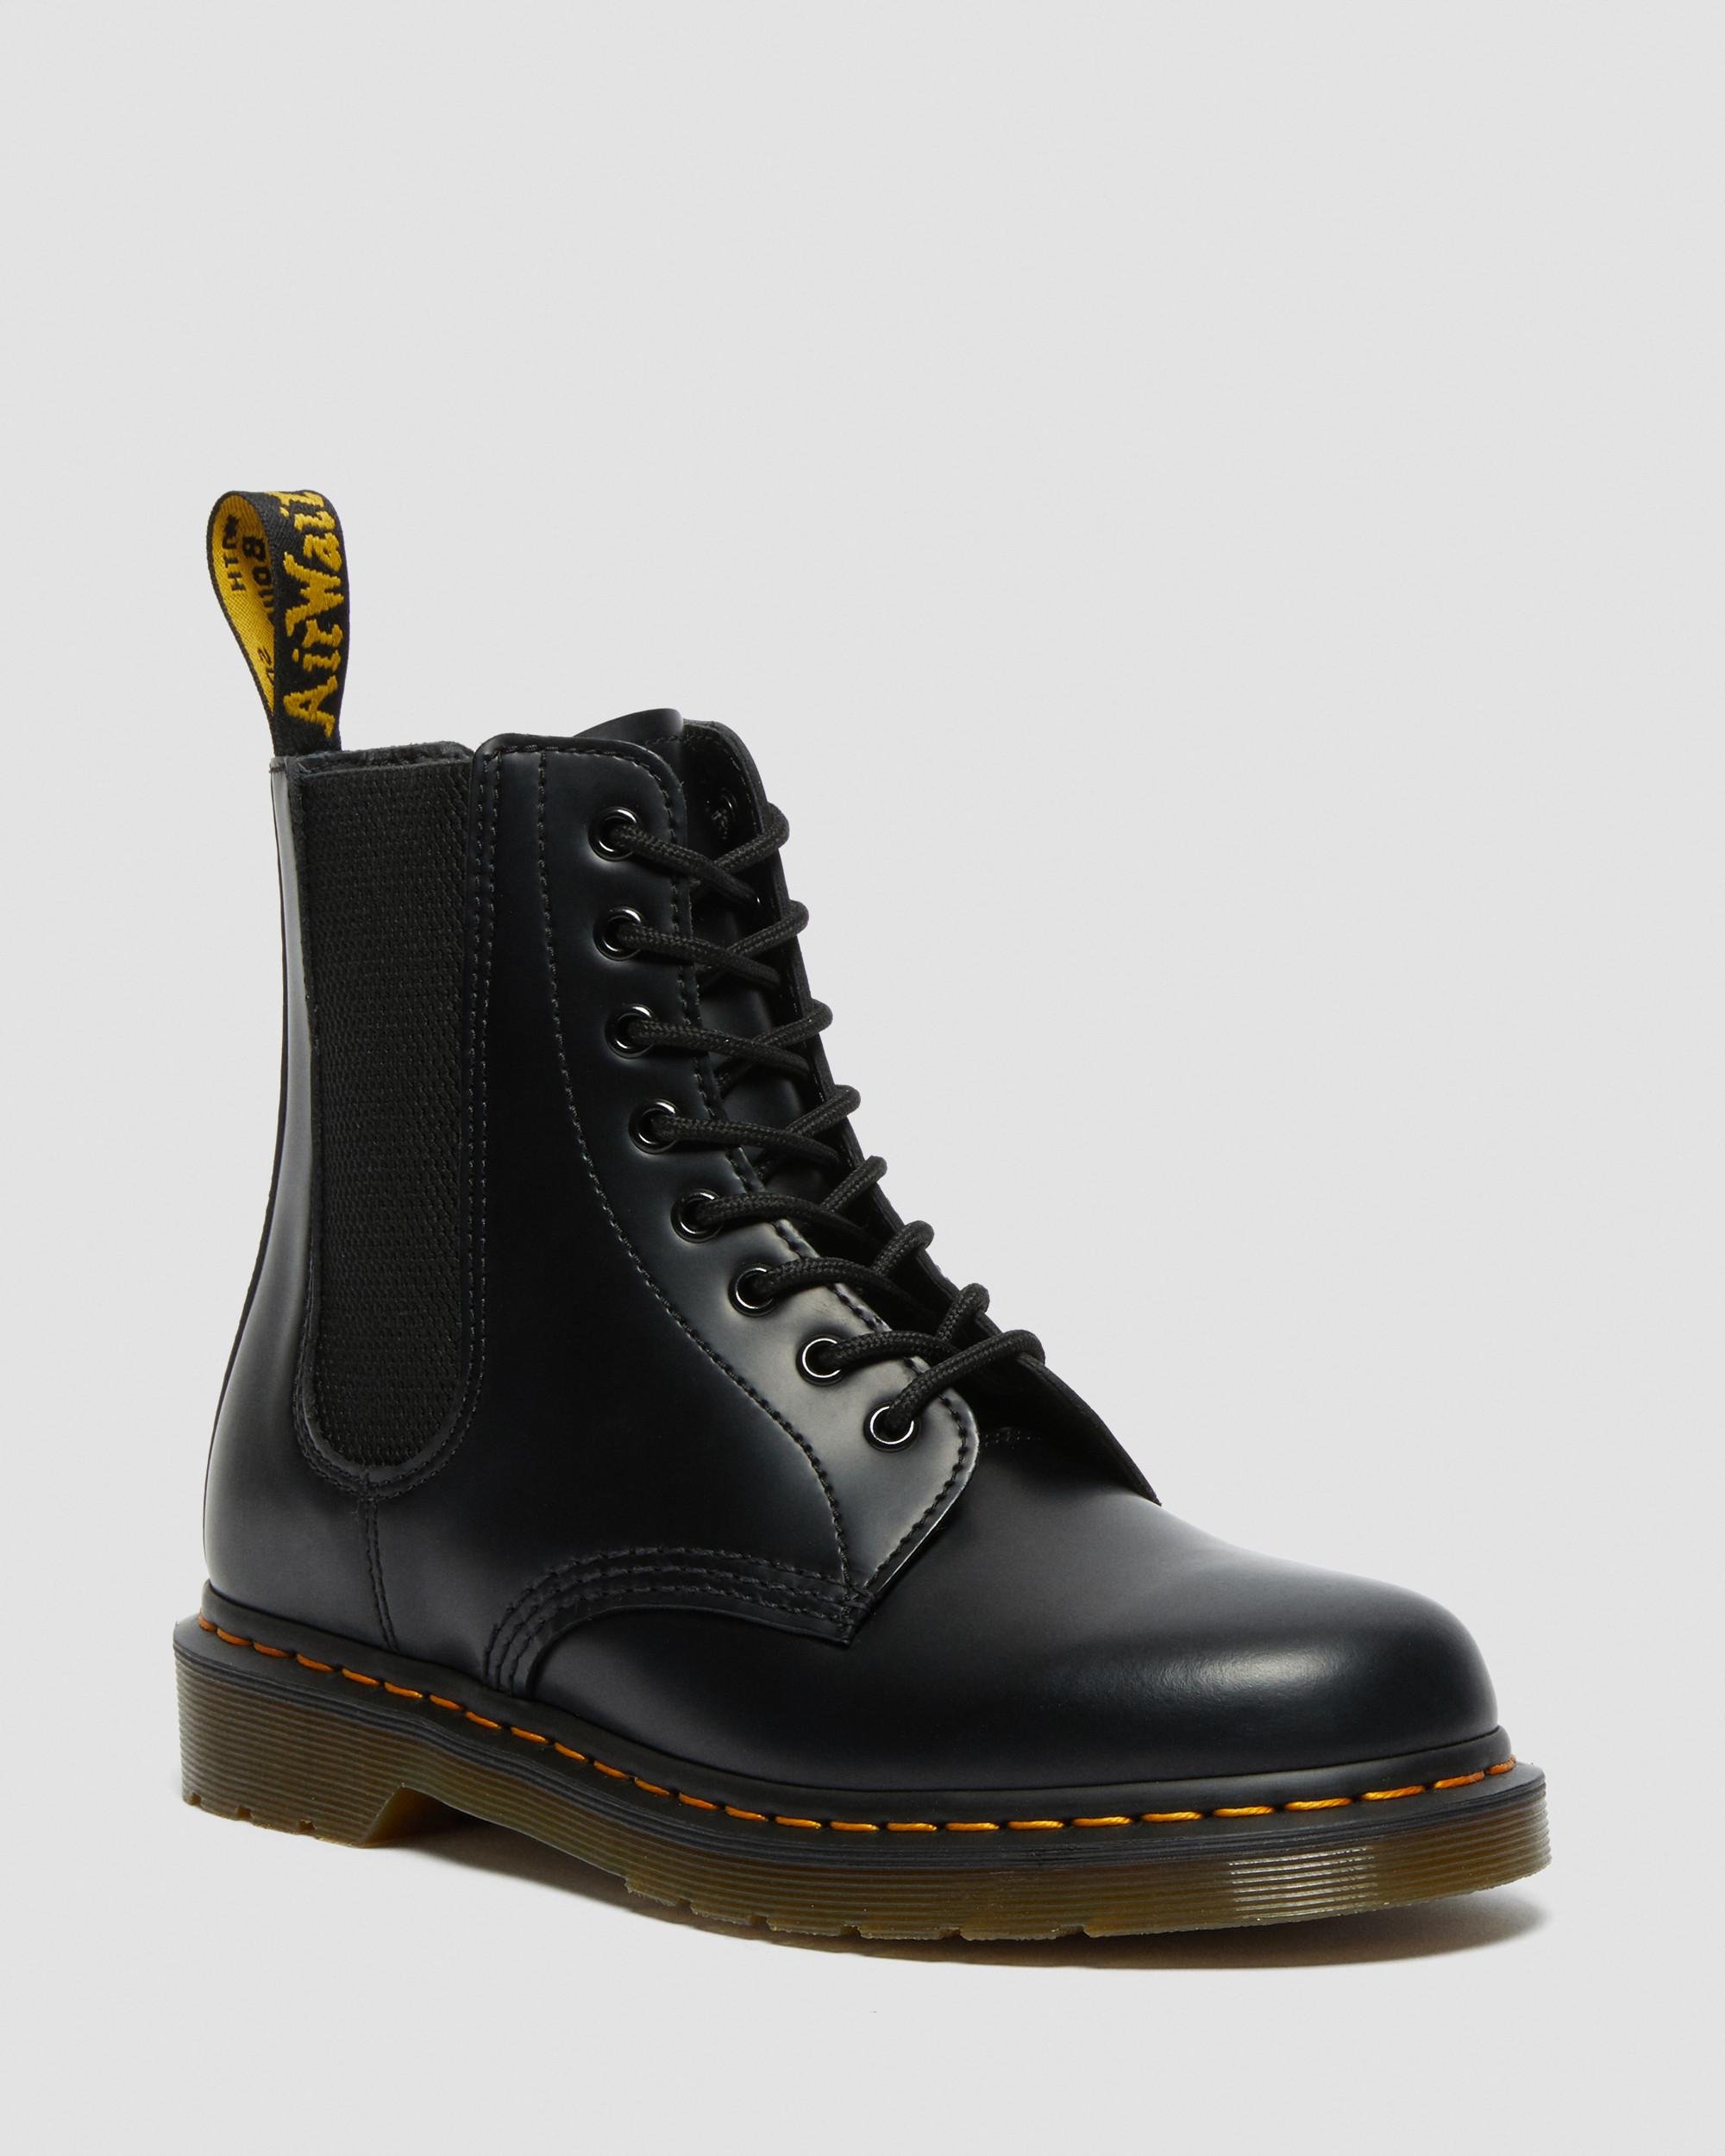 Dr. Martens 1460 Boot — Design Life-Cycle